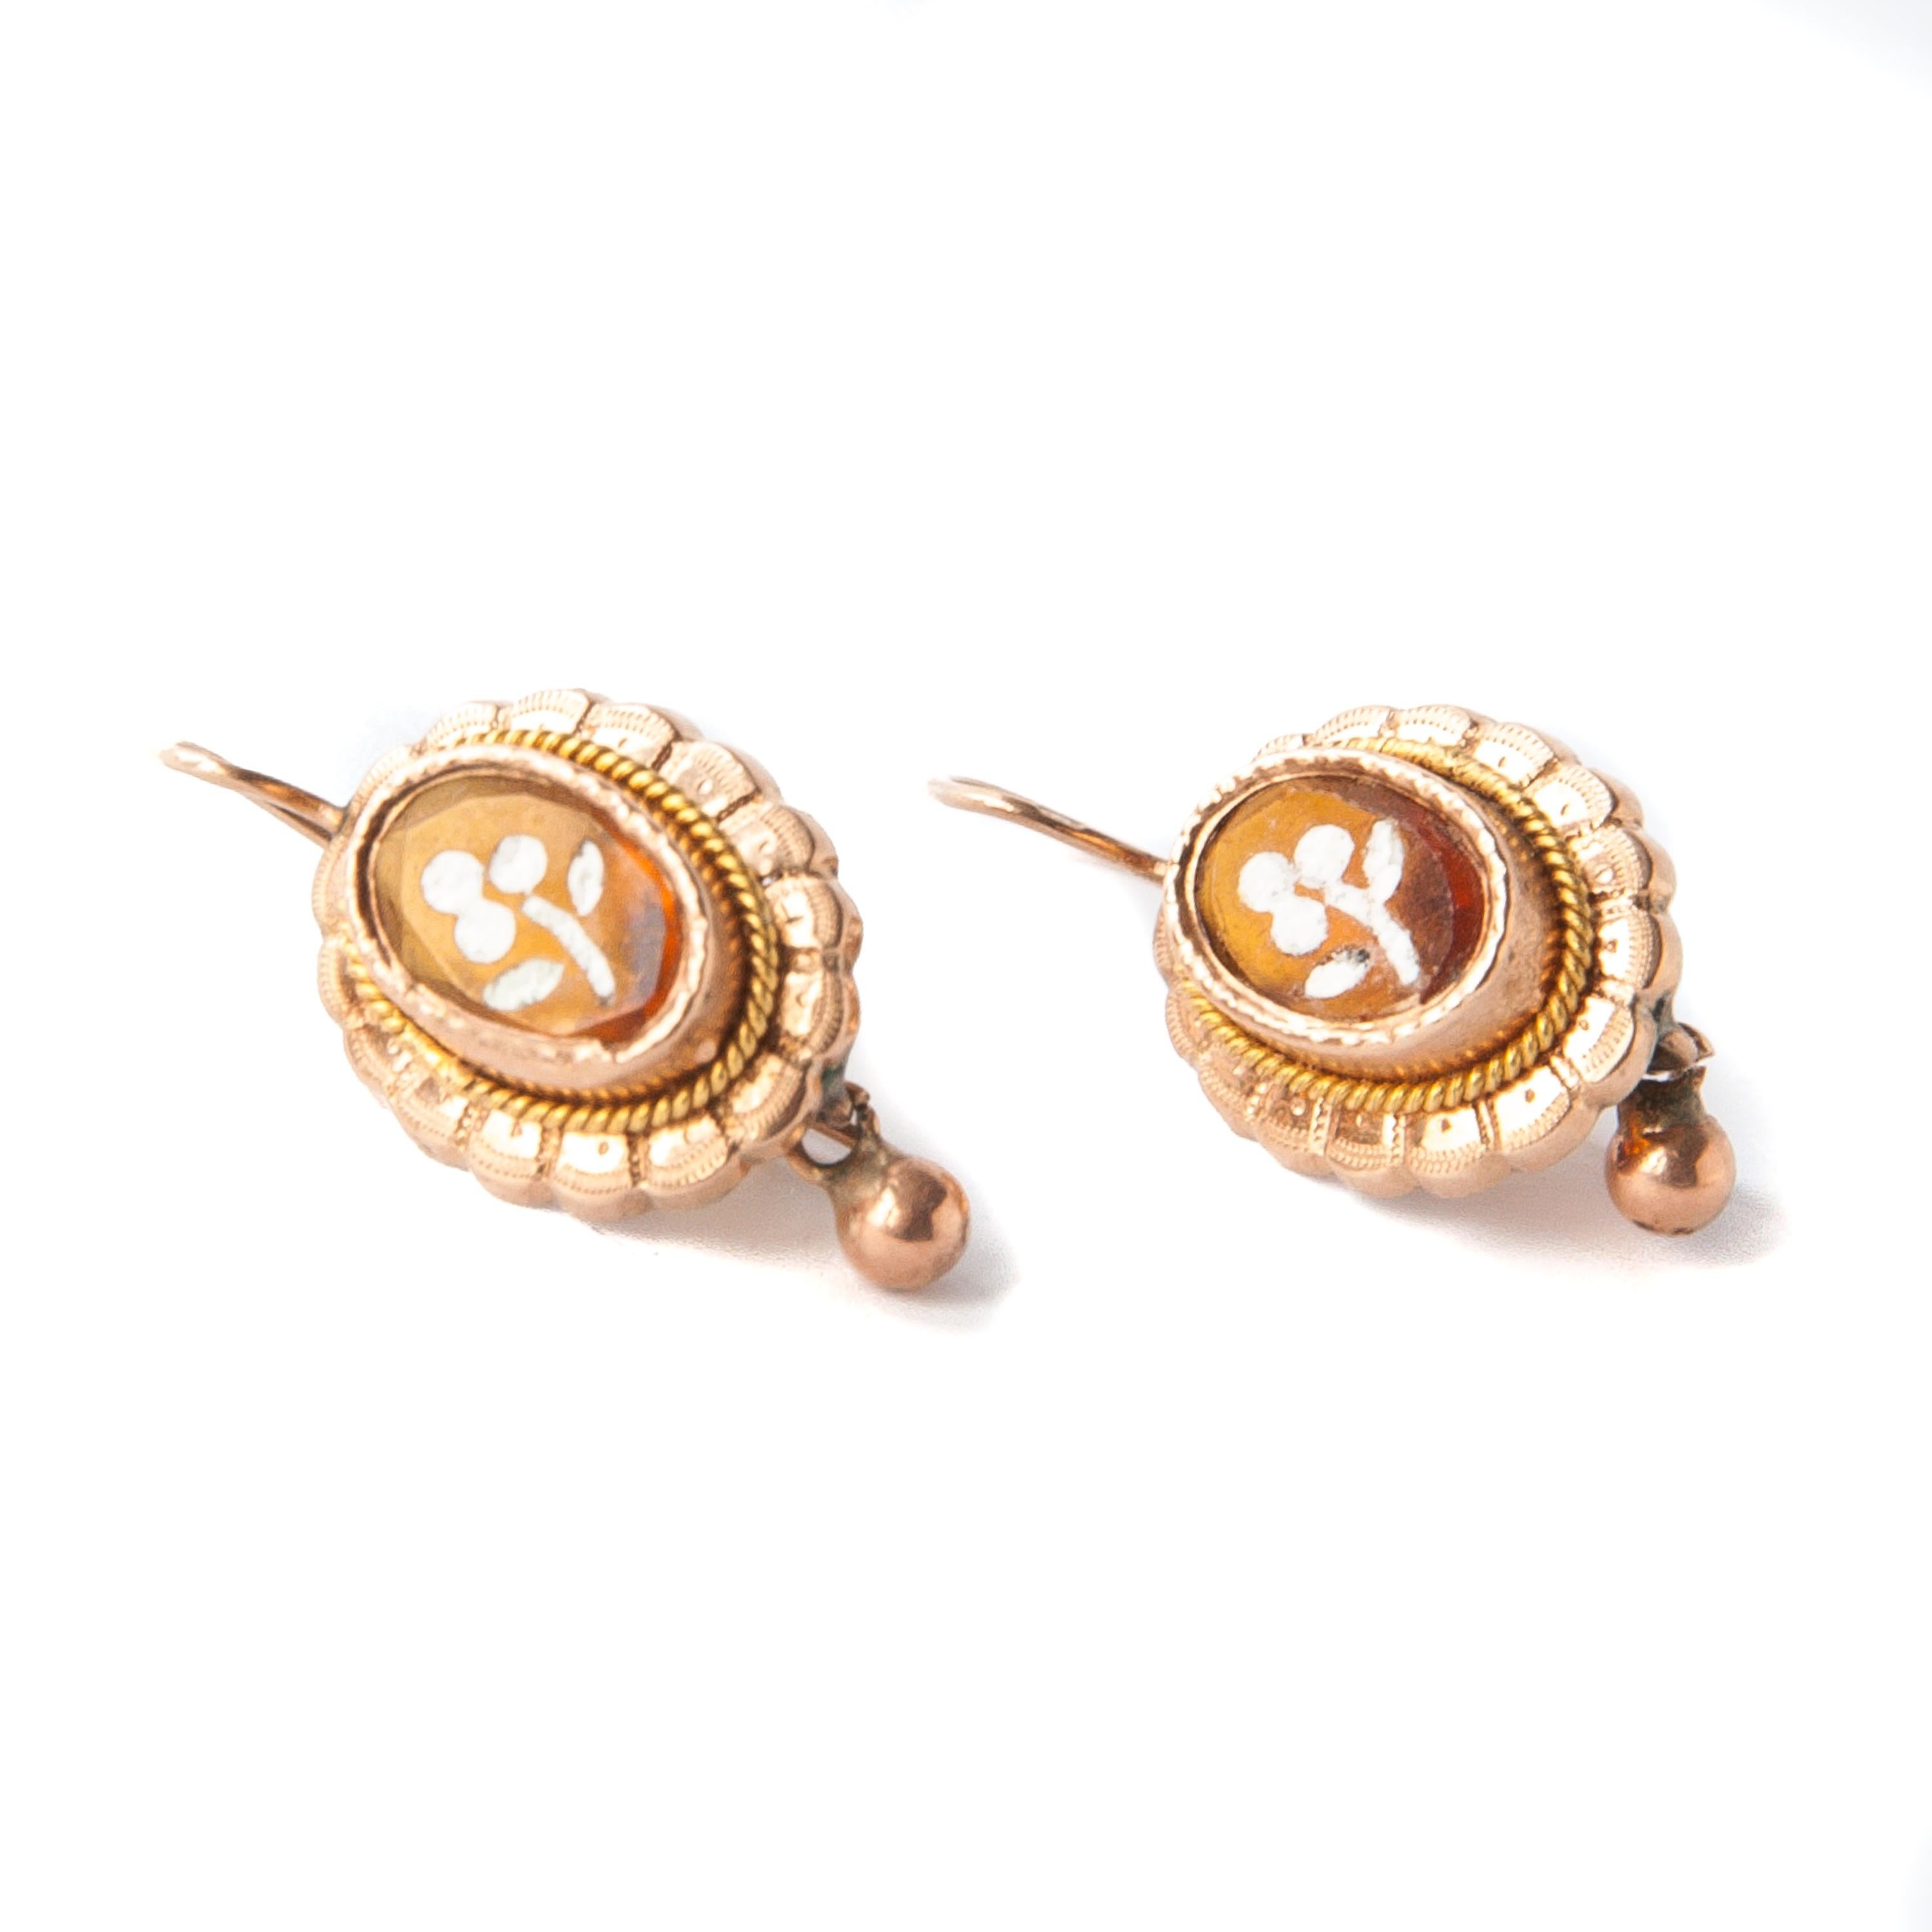 Elegant pair of 14 karat gold Victorian drop earrings. The earrings are inlaid with honey colored citrine. The citrine gemstone has a small white painted flower at the front of the earrings. They are oval-shaped and have a little bell dangling below